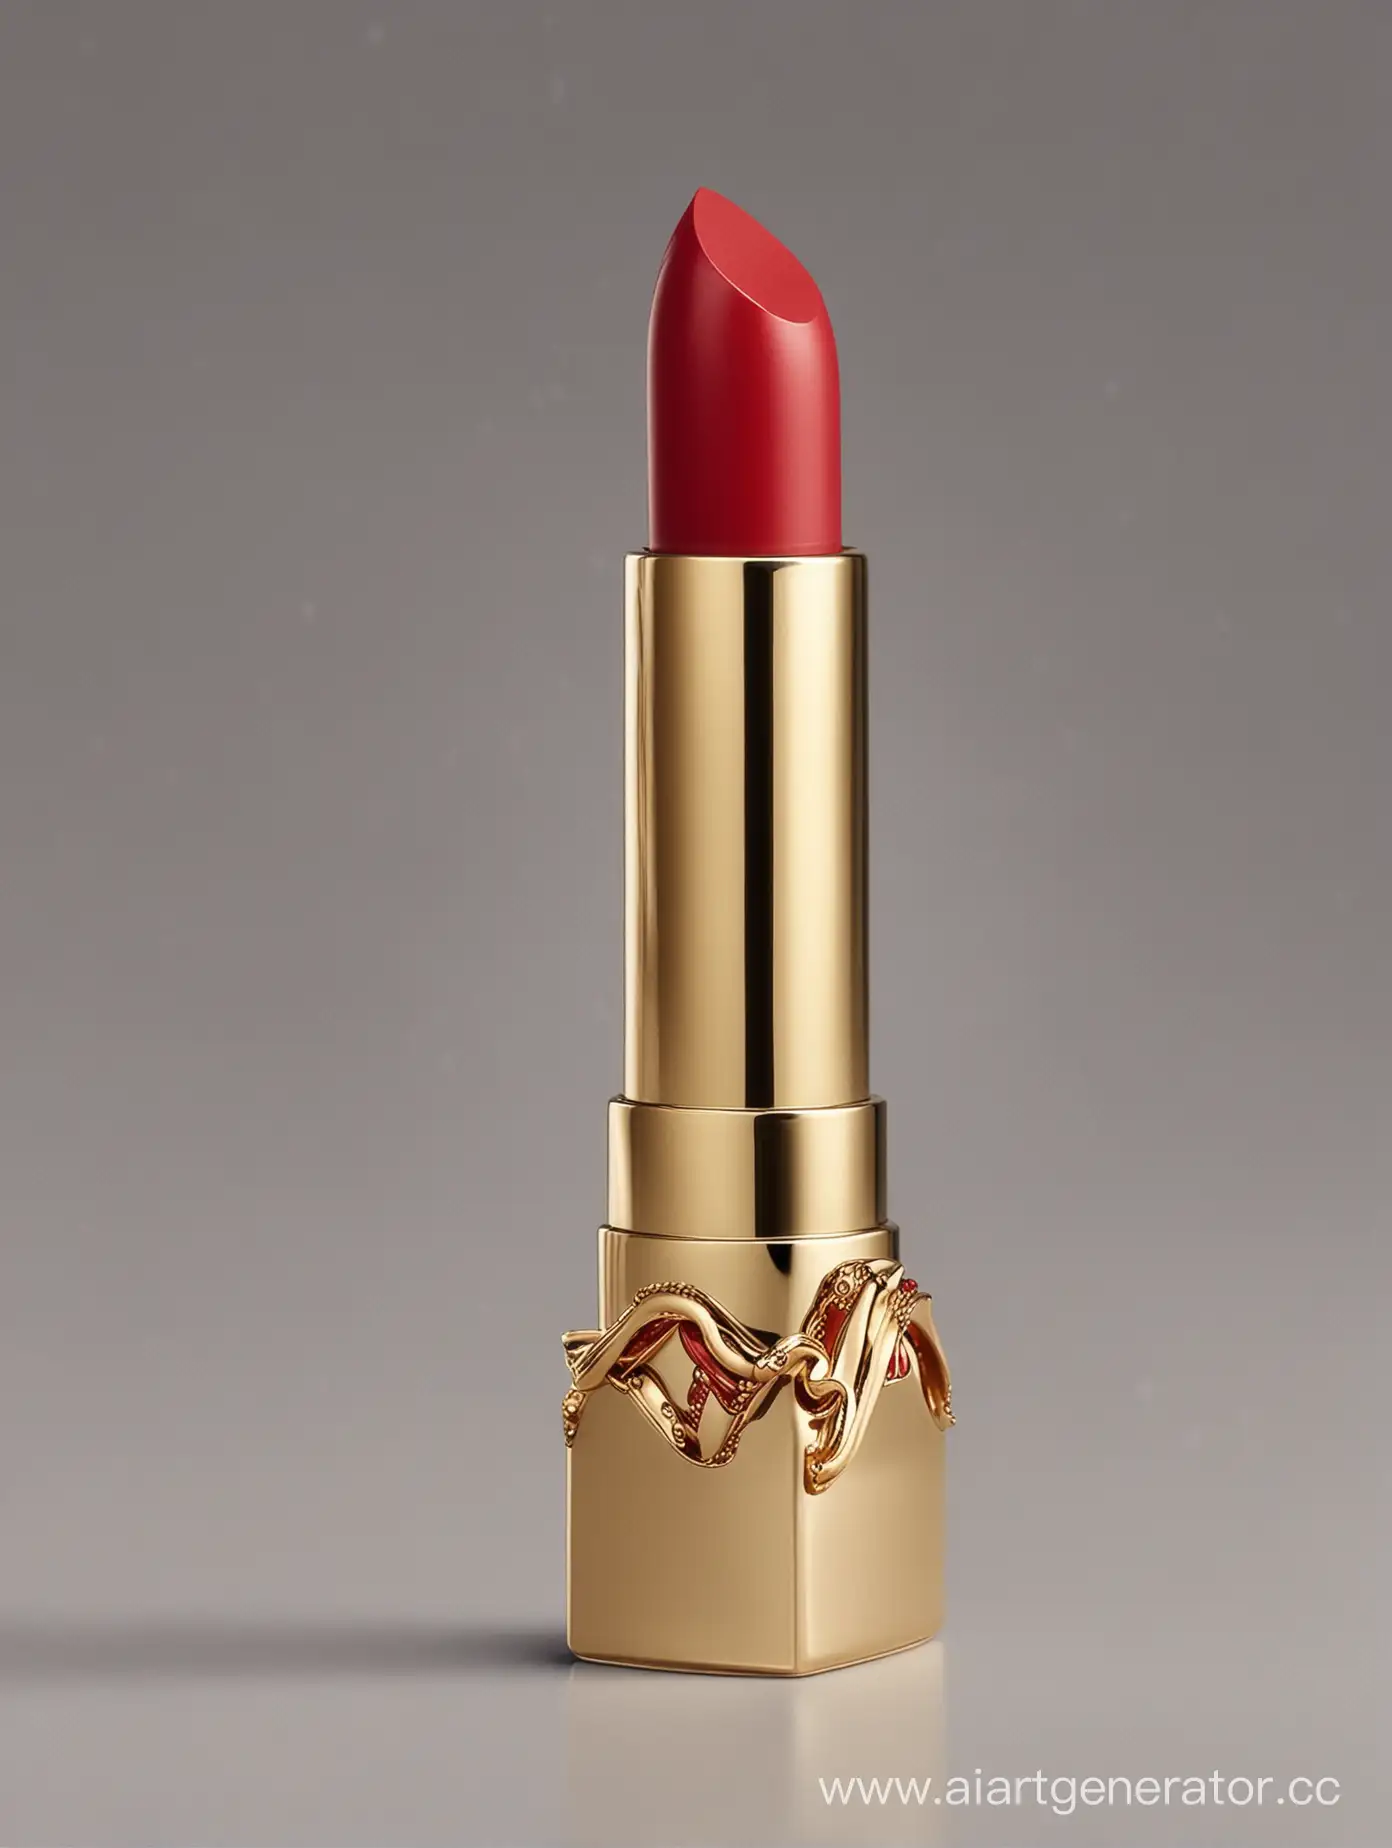 Elegant-Red-Lipstick-Bottle-with-Gold-Accents-Modern-Cosmetic-Design